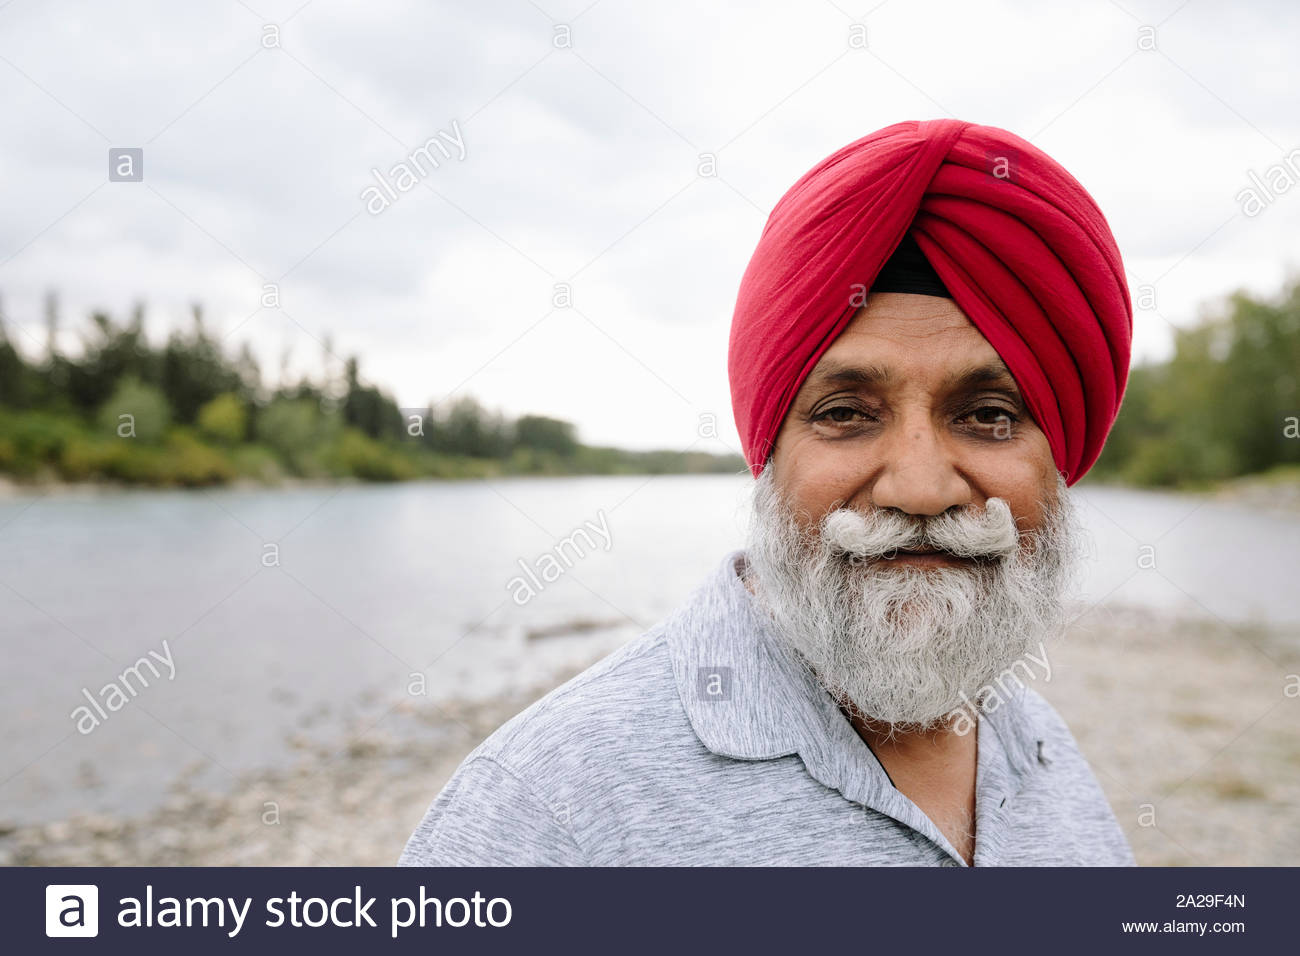 Portrait of Indian man wearing red turban on lakeshore Stock Photo